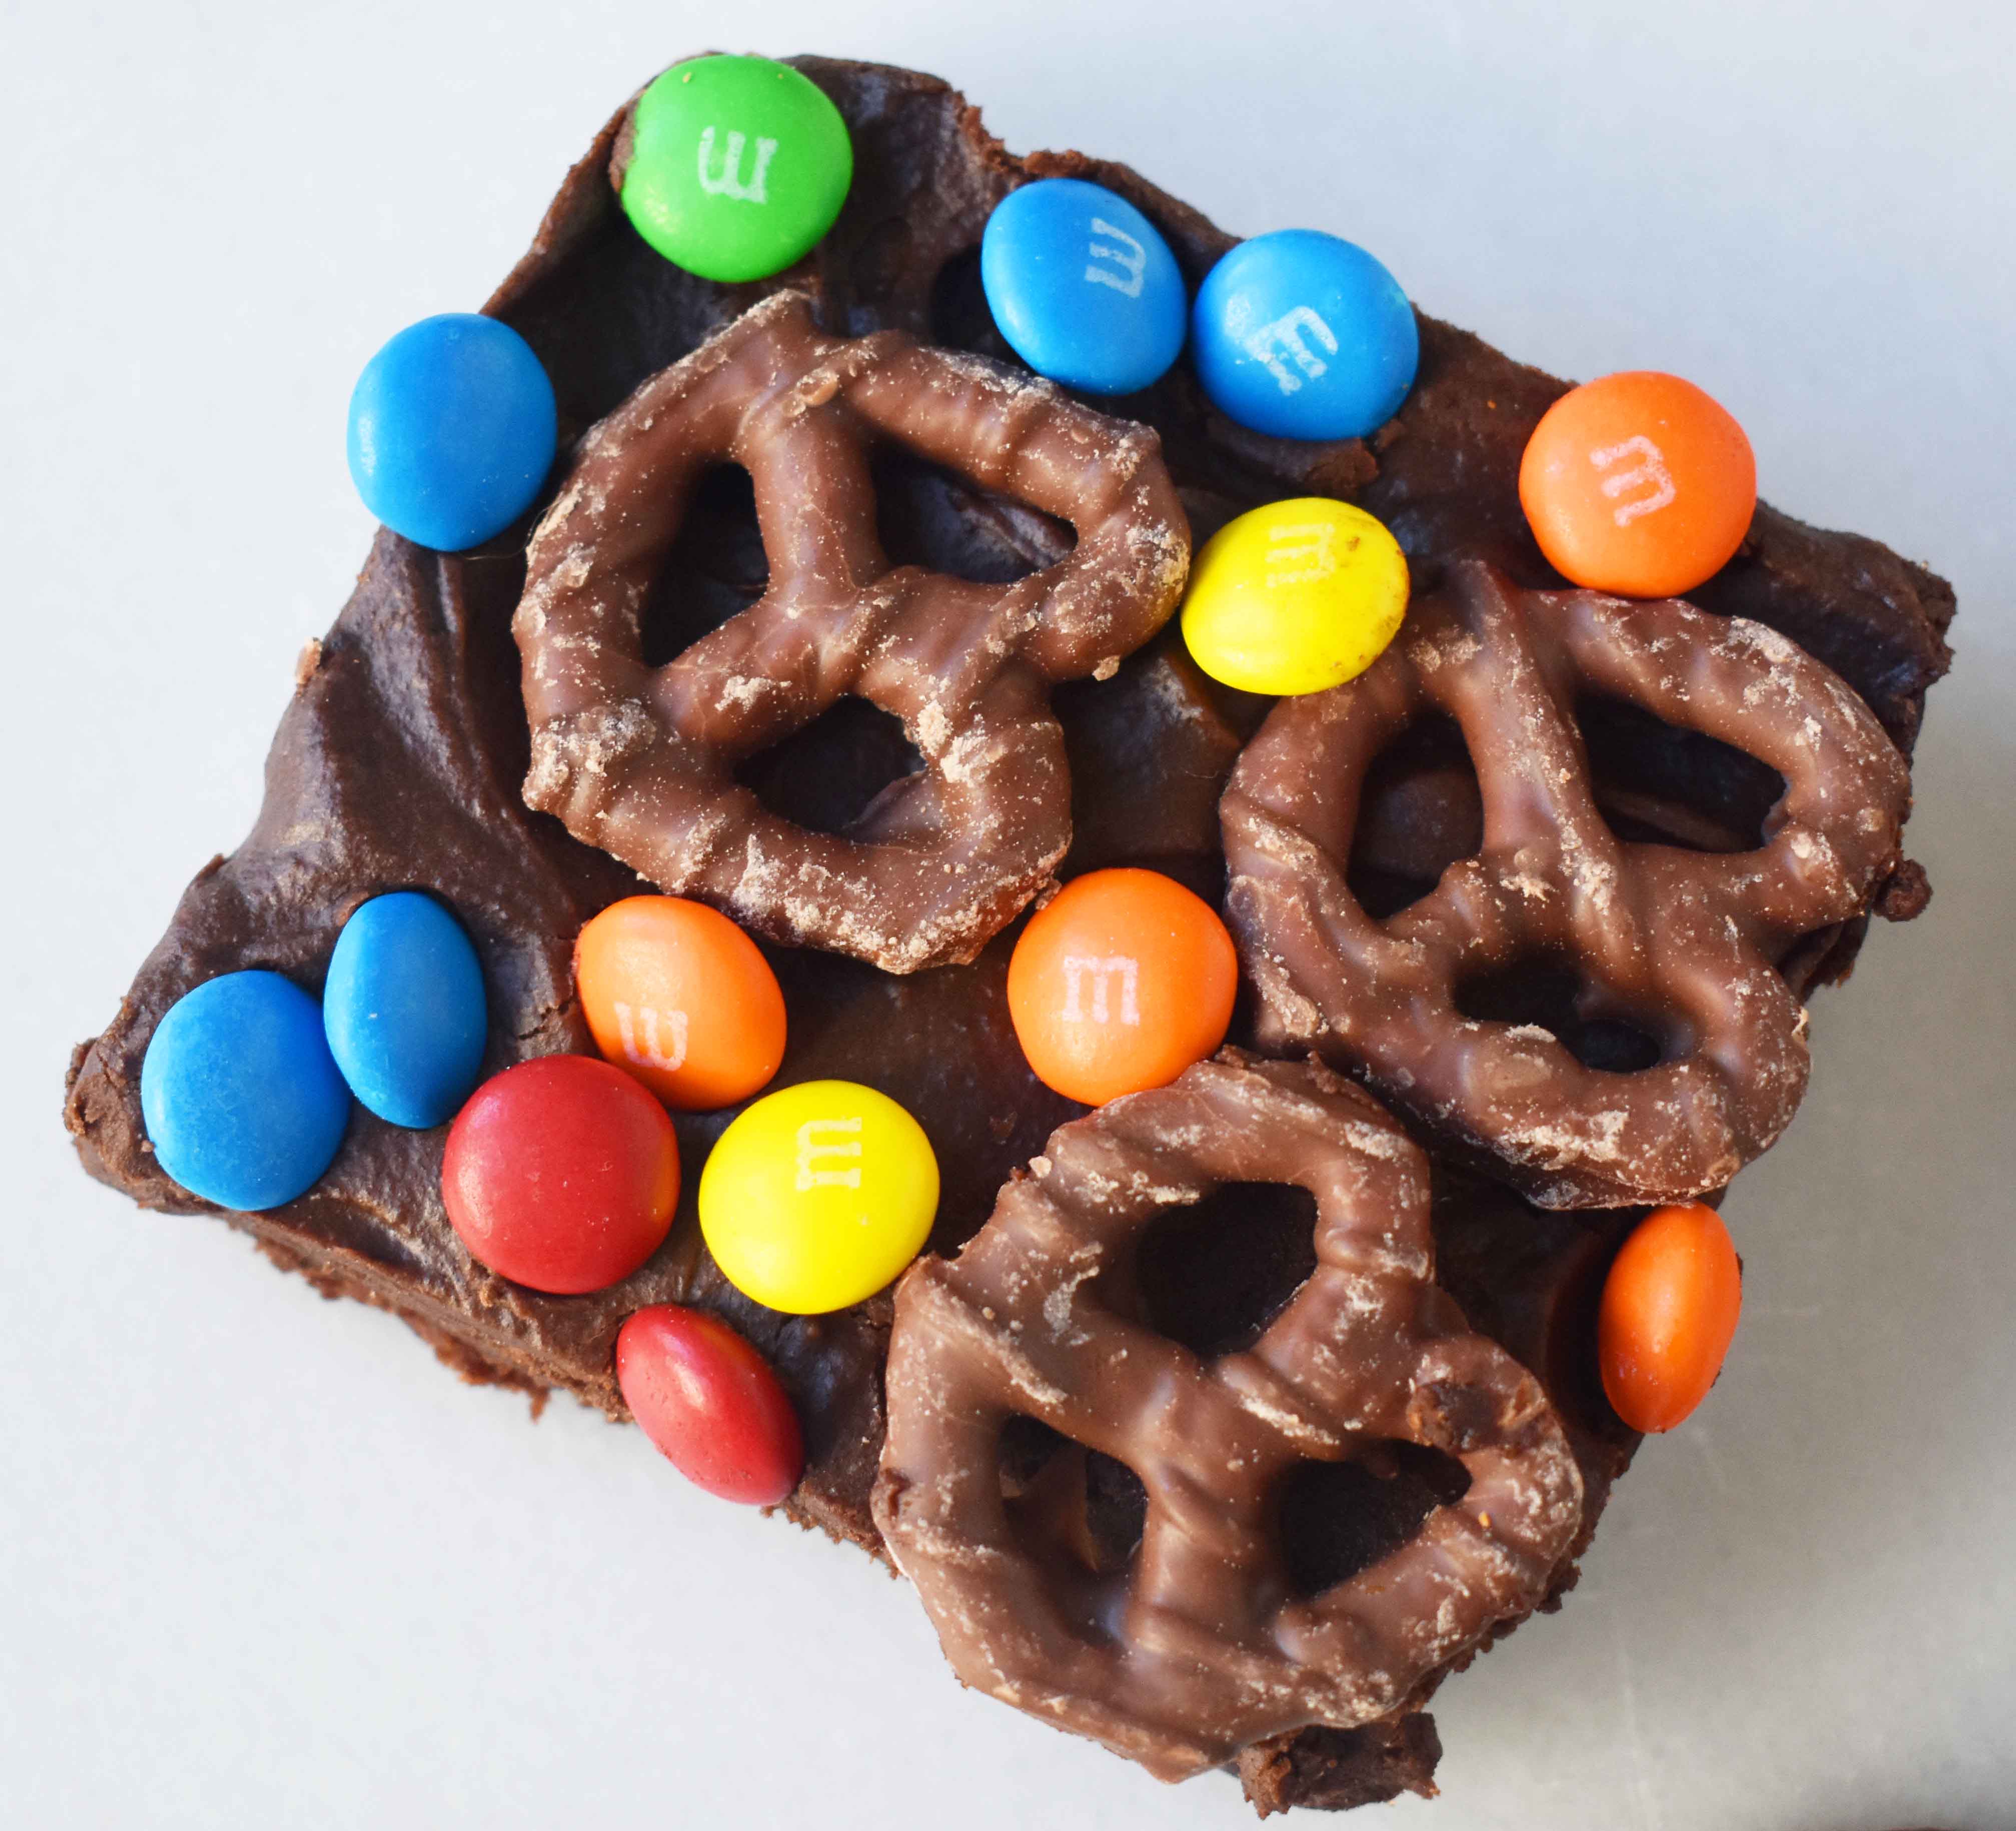 Super Bowl Chocolate Covered Pretzel Brownies. Chewy rich chocolate chunk brownies topped with creamy frosting, chocolate covered pretzels, and M & M's. www.modernhoney.com